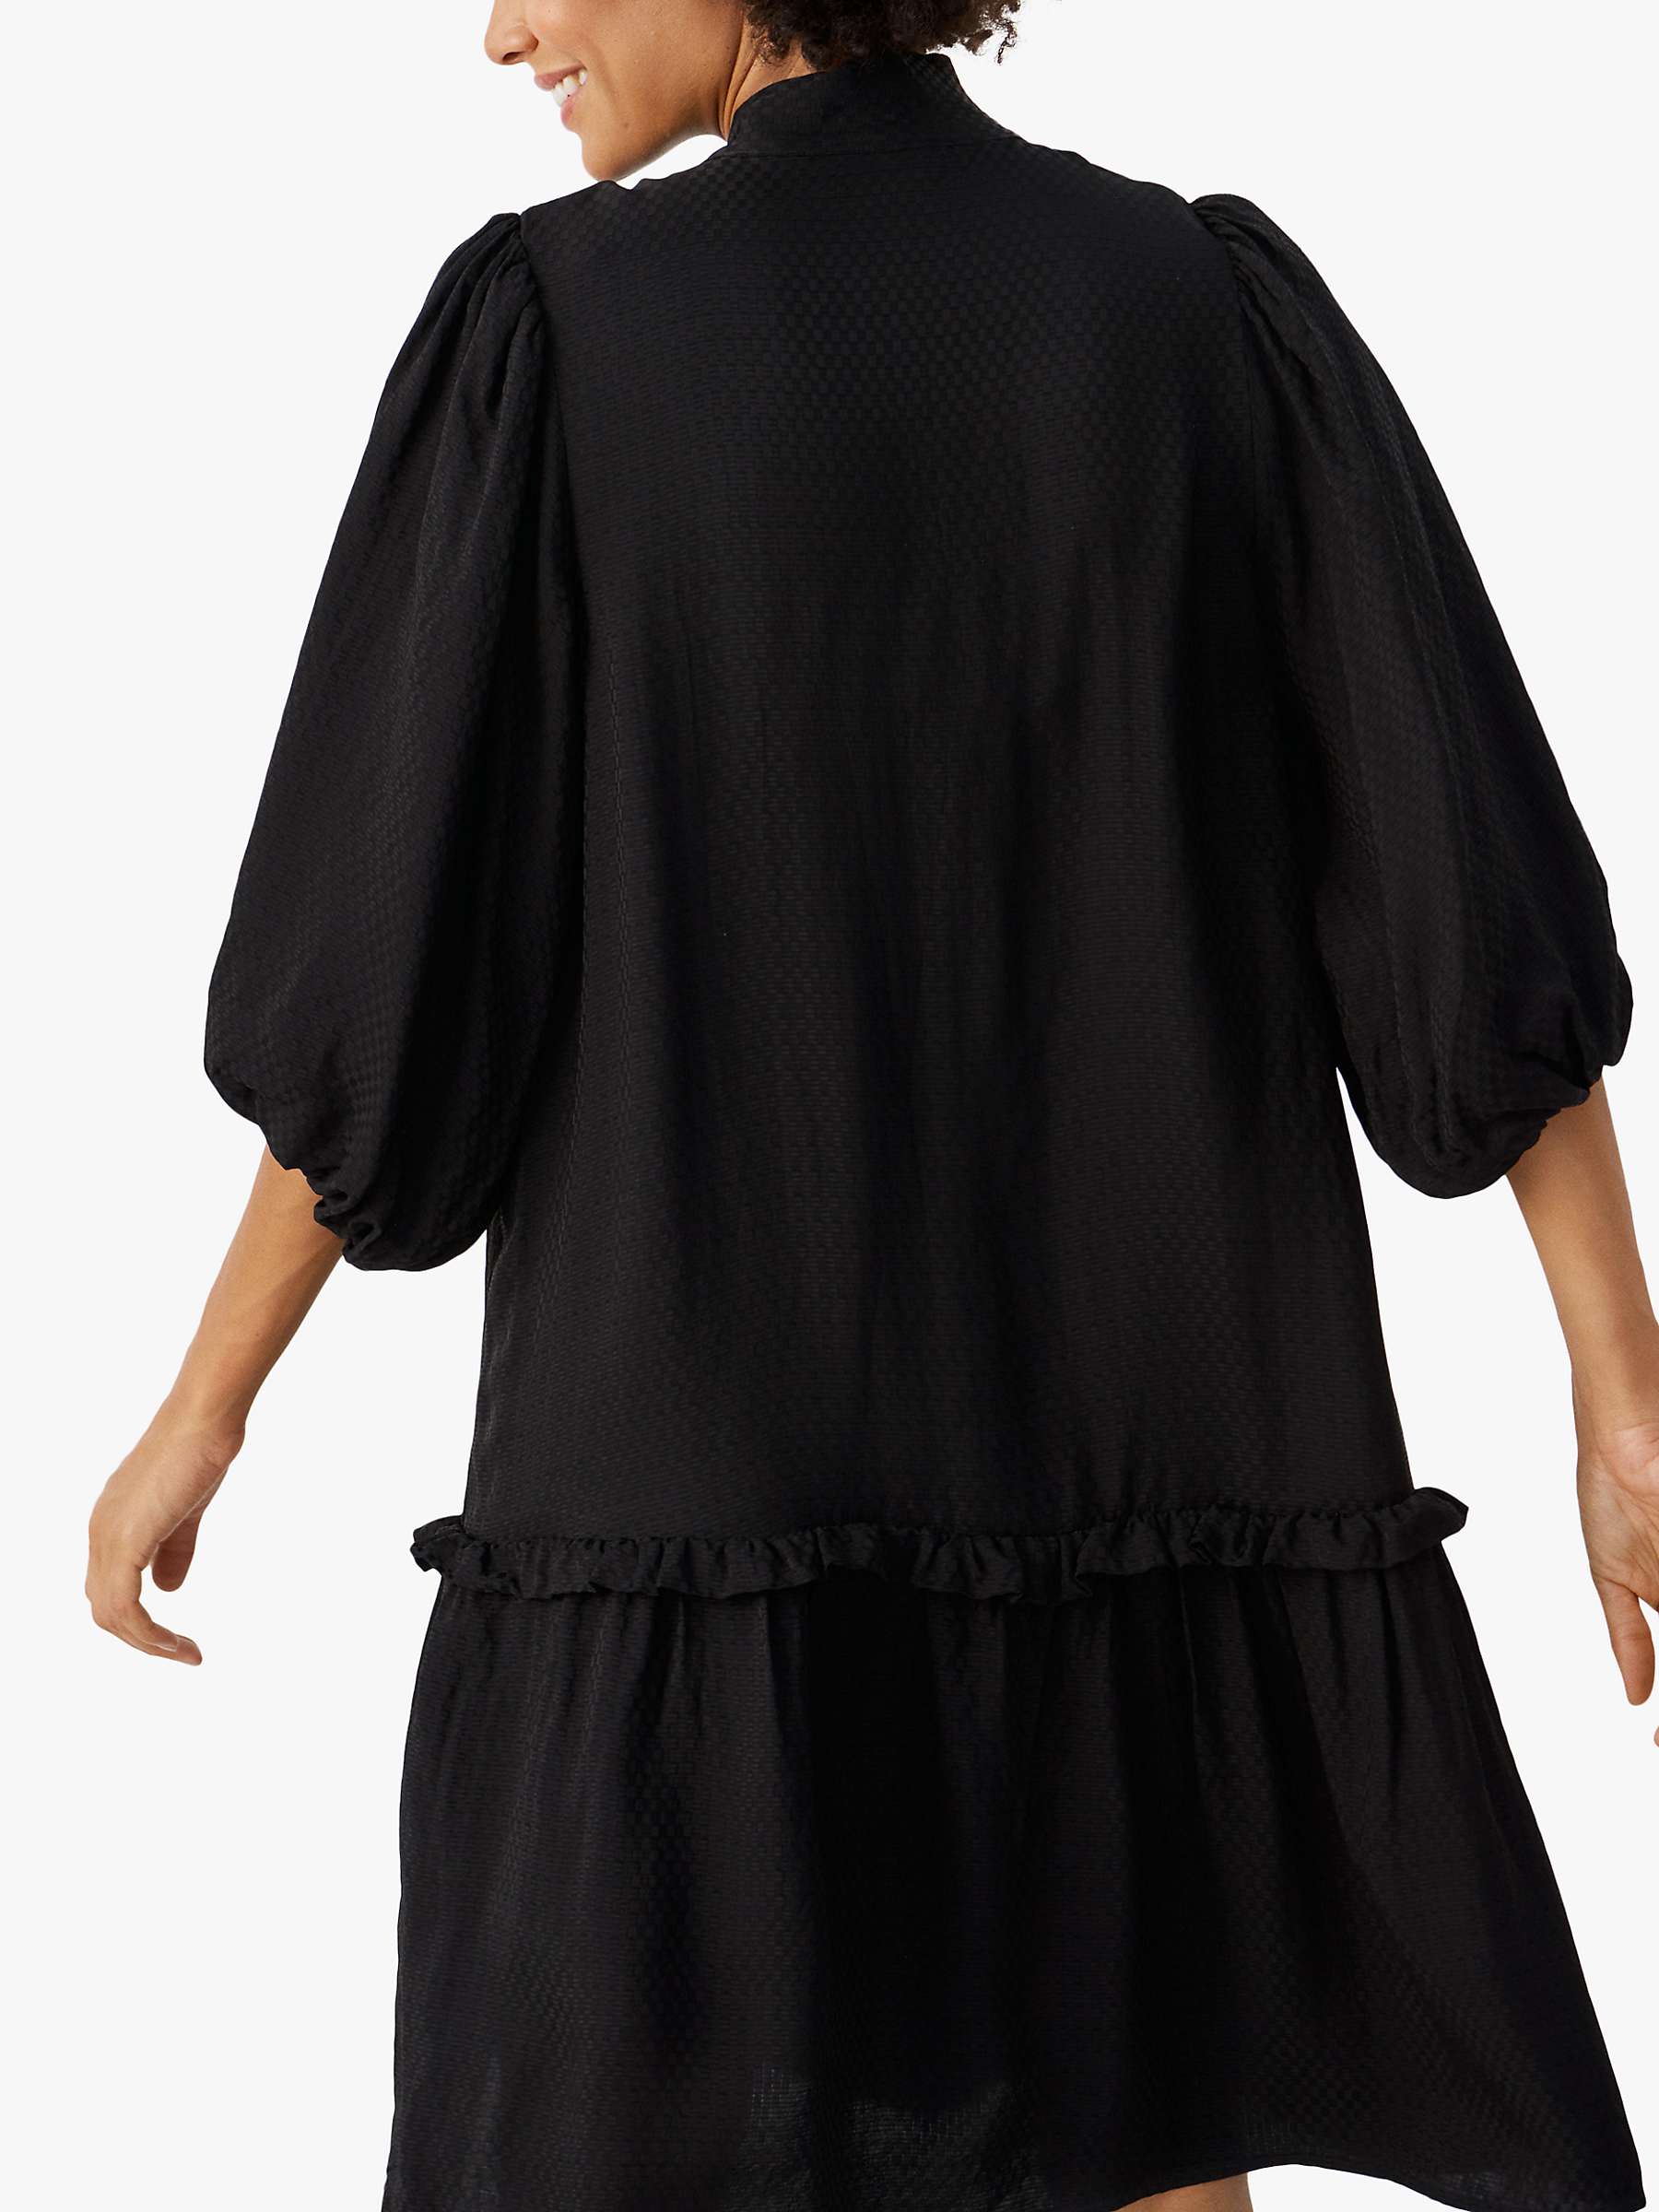 Buy Part Two Tisha Relaxed Fit Half Sleeve Knee Length Dress, Black Online at johnlewis.com